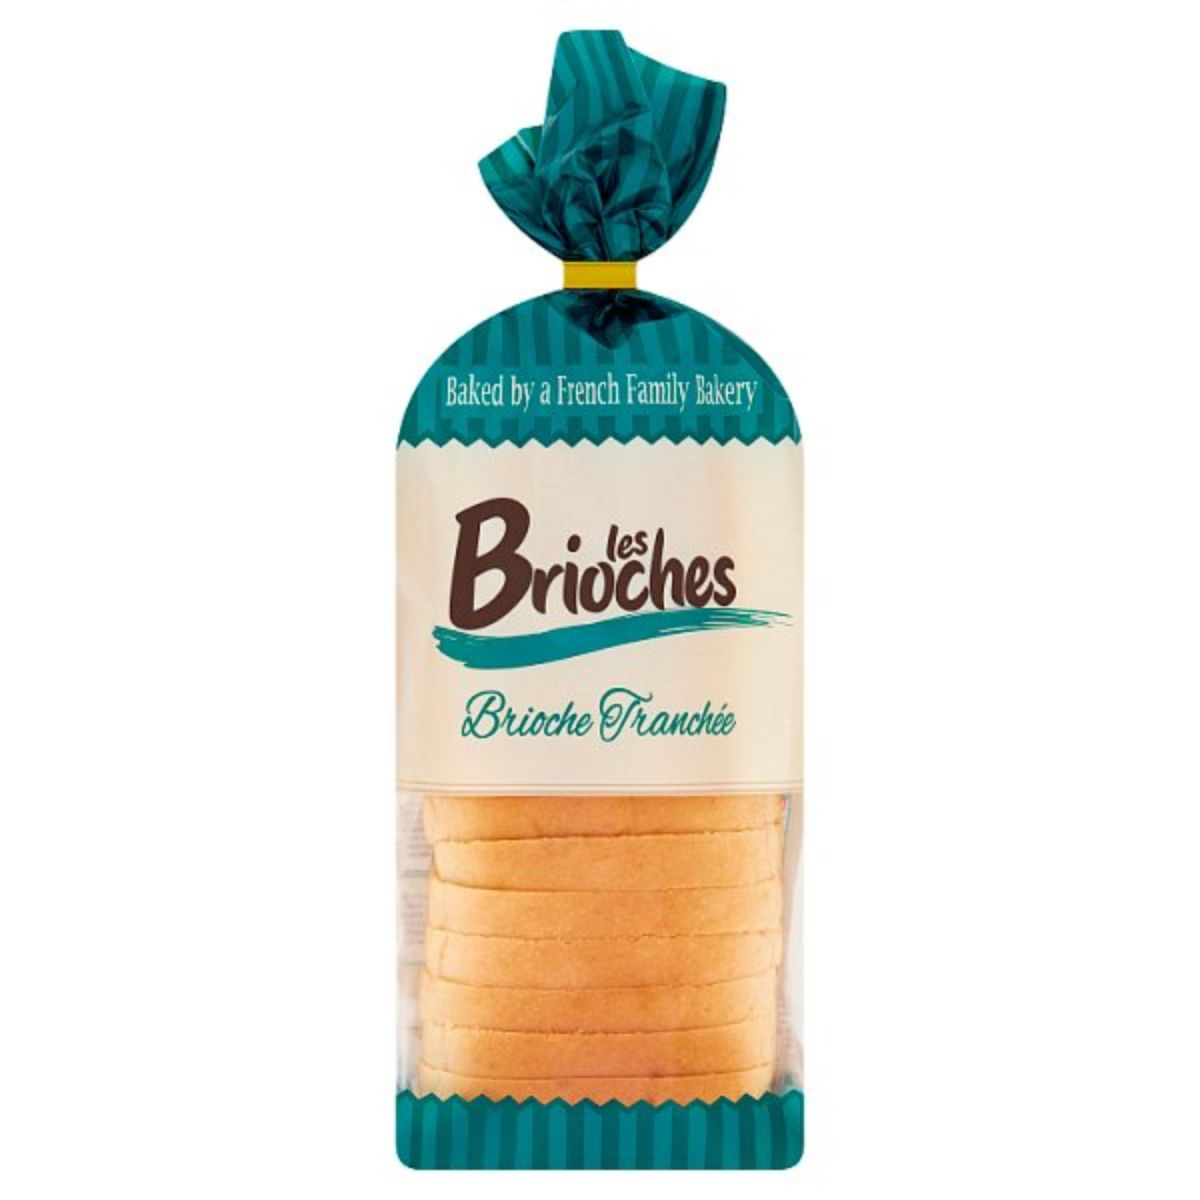 A bag of Les - Brioches Brioche Tranchée - 500g with a label on it.